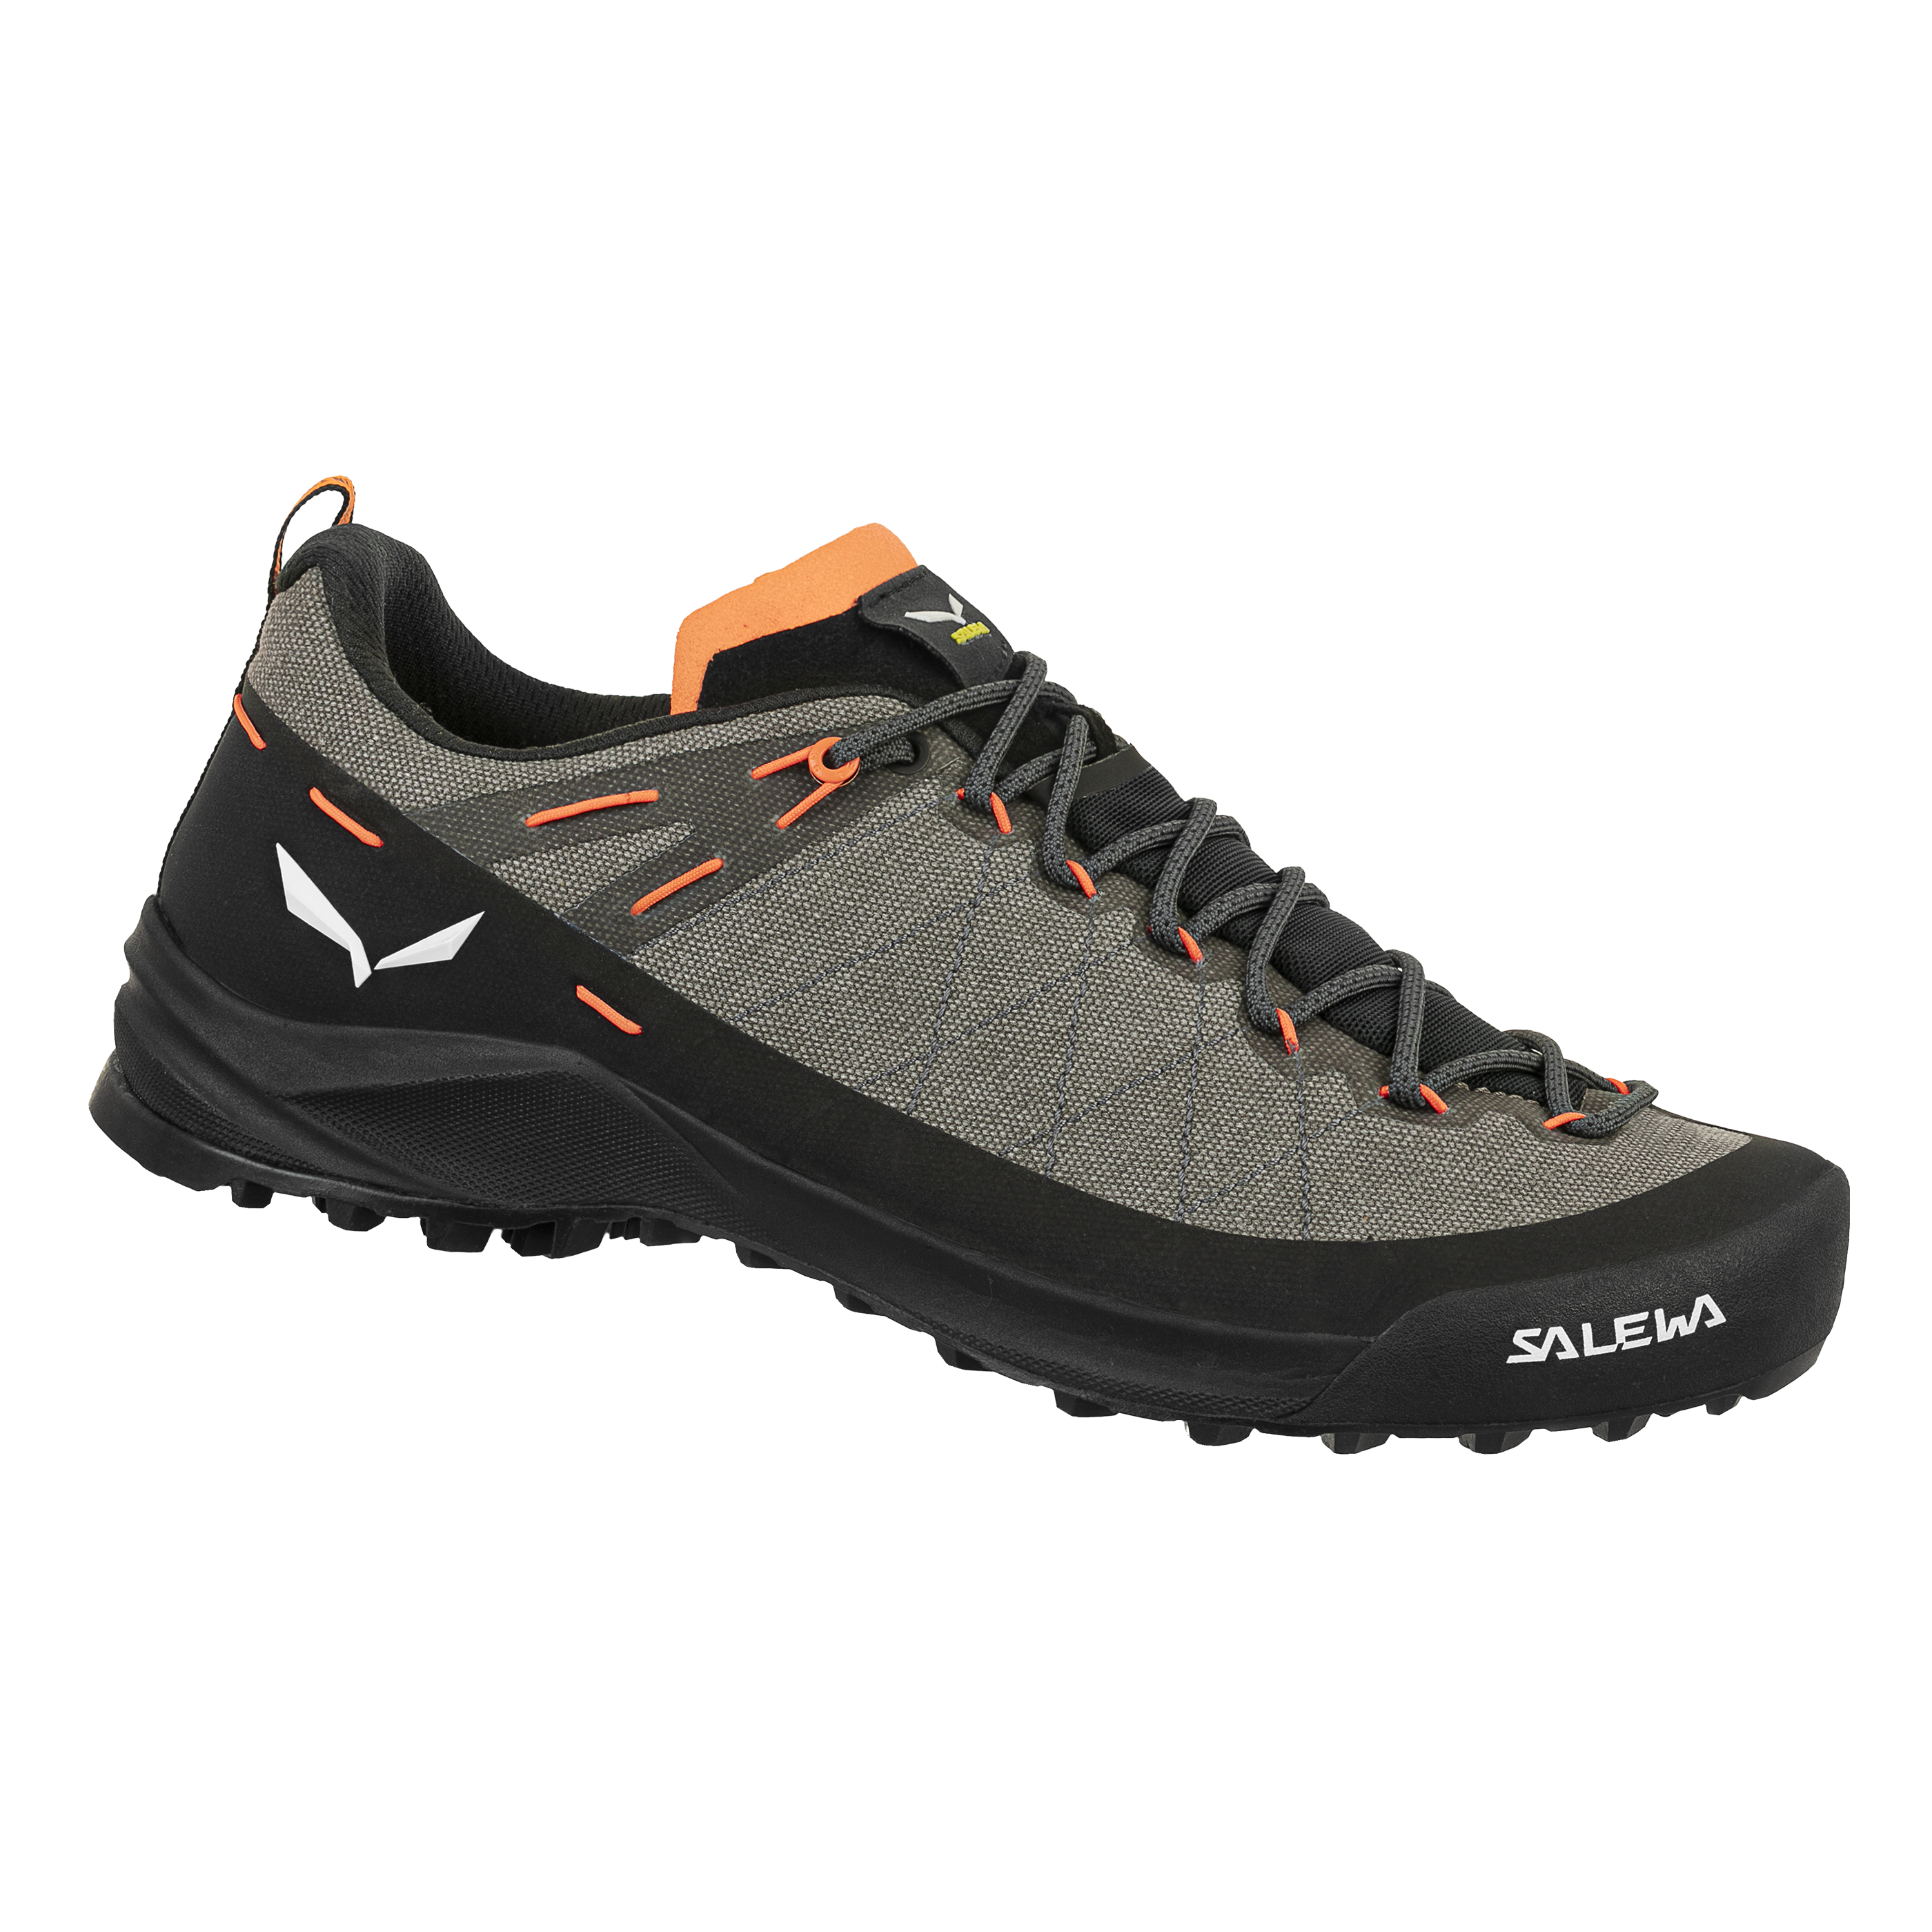 Salewa Men's Wildfire Canvas Approach Shoes